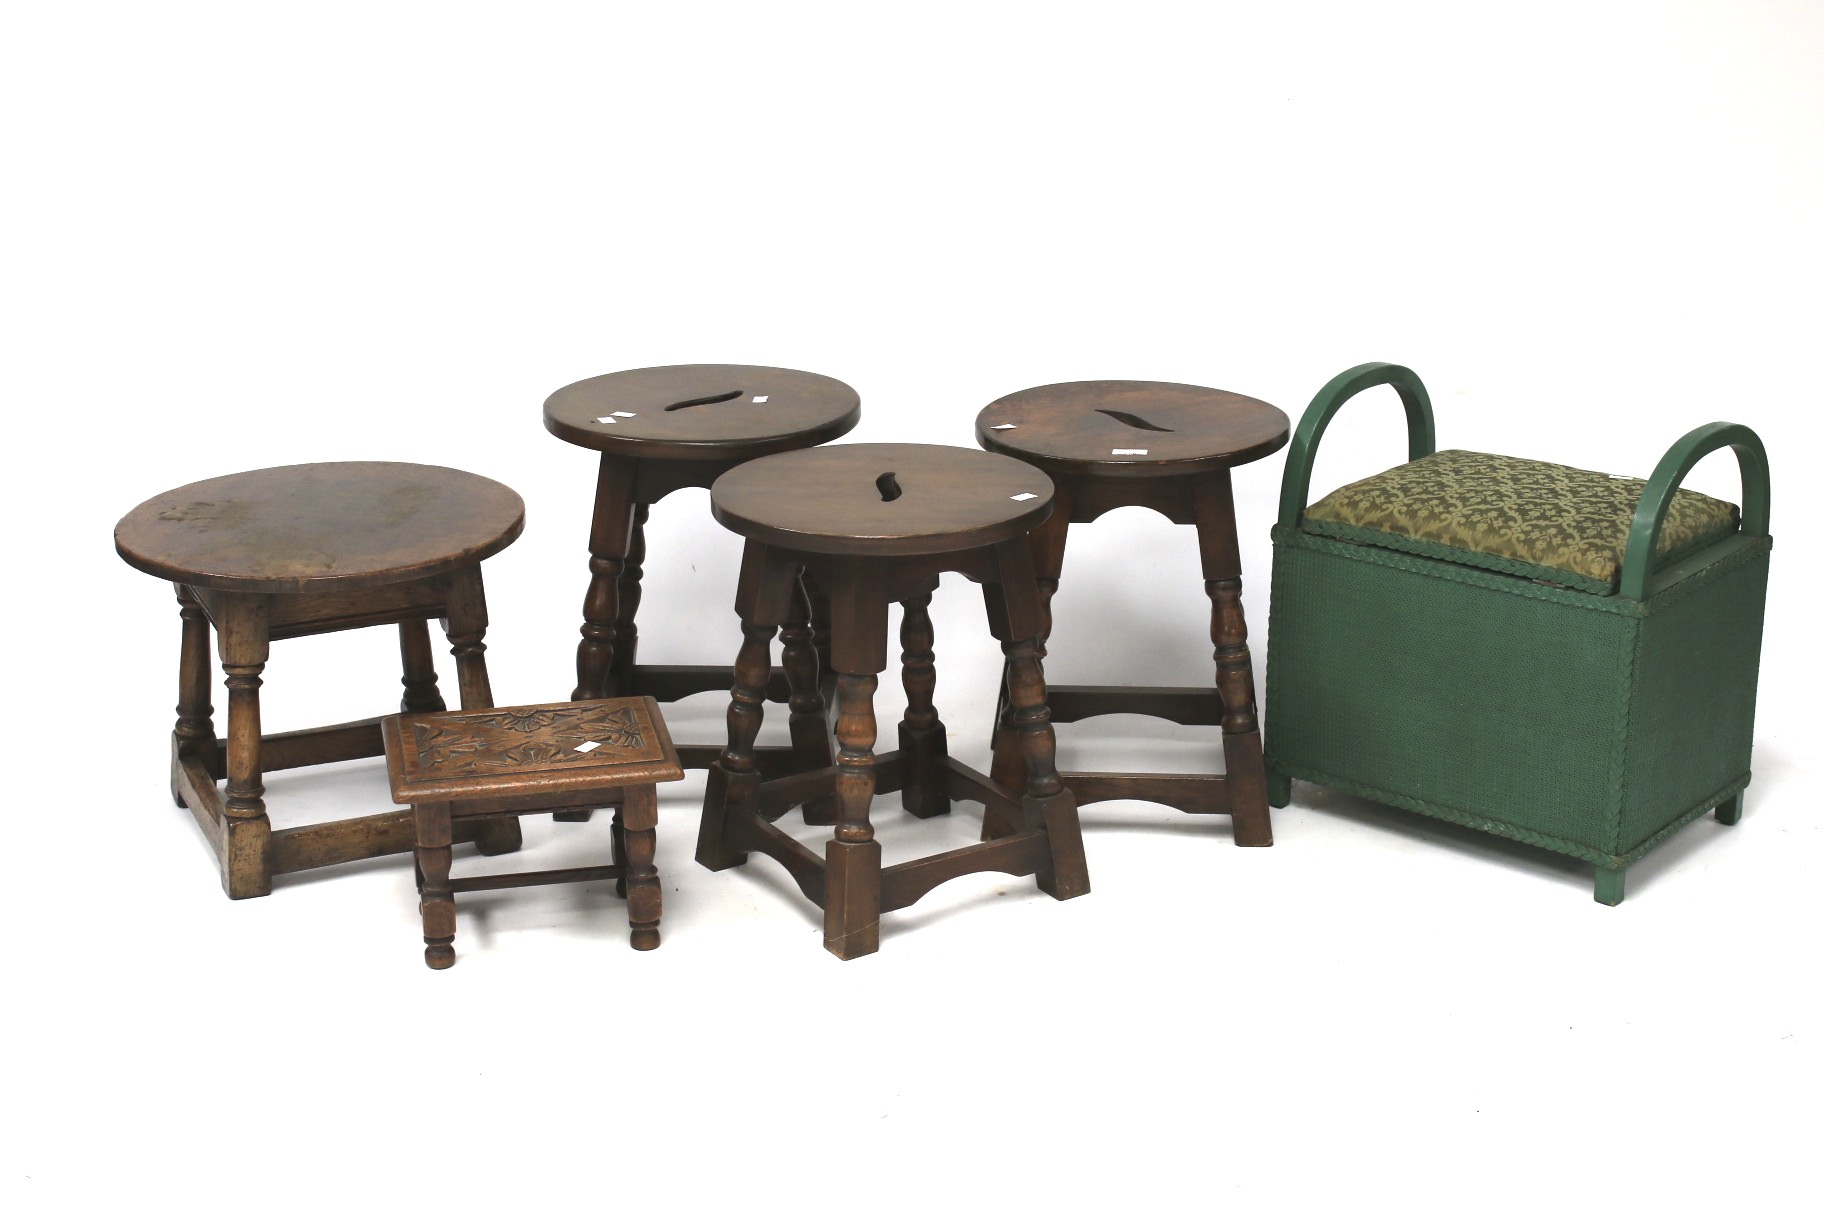 Five 19th century stools and a small storage seat.